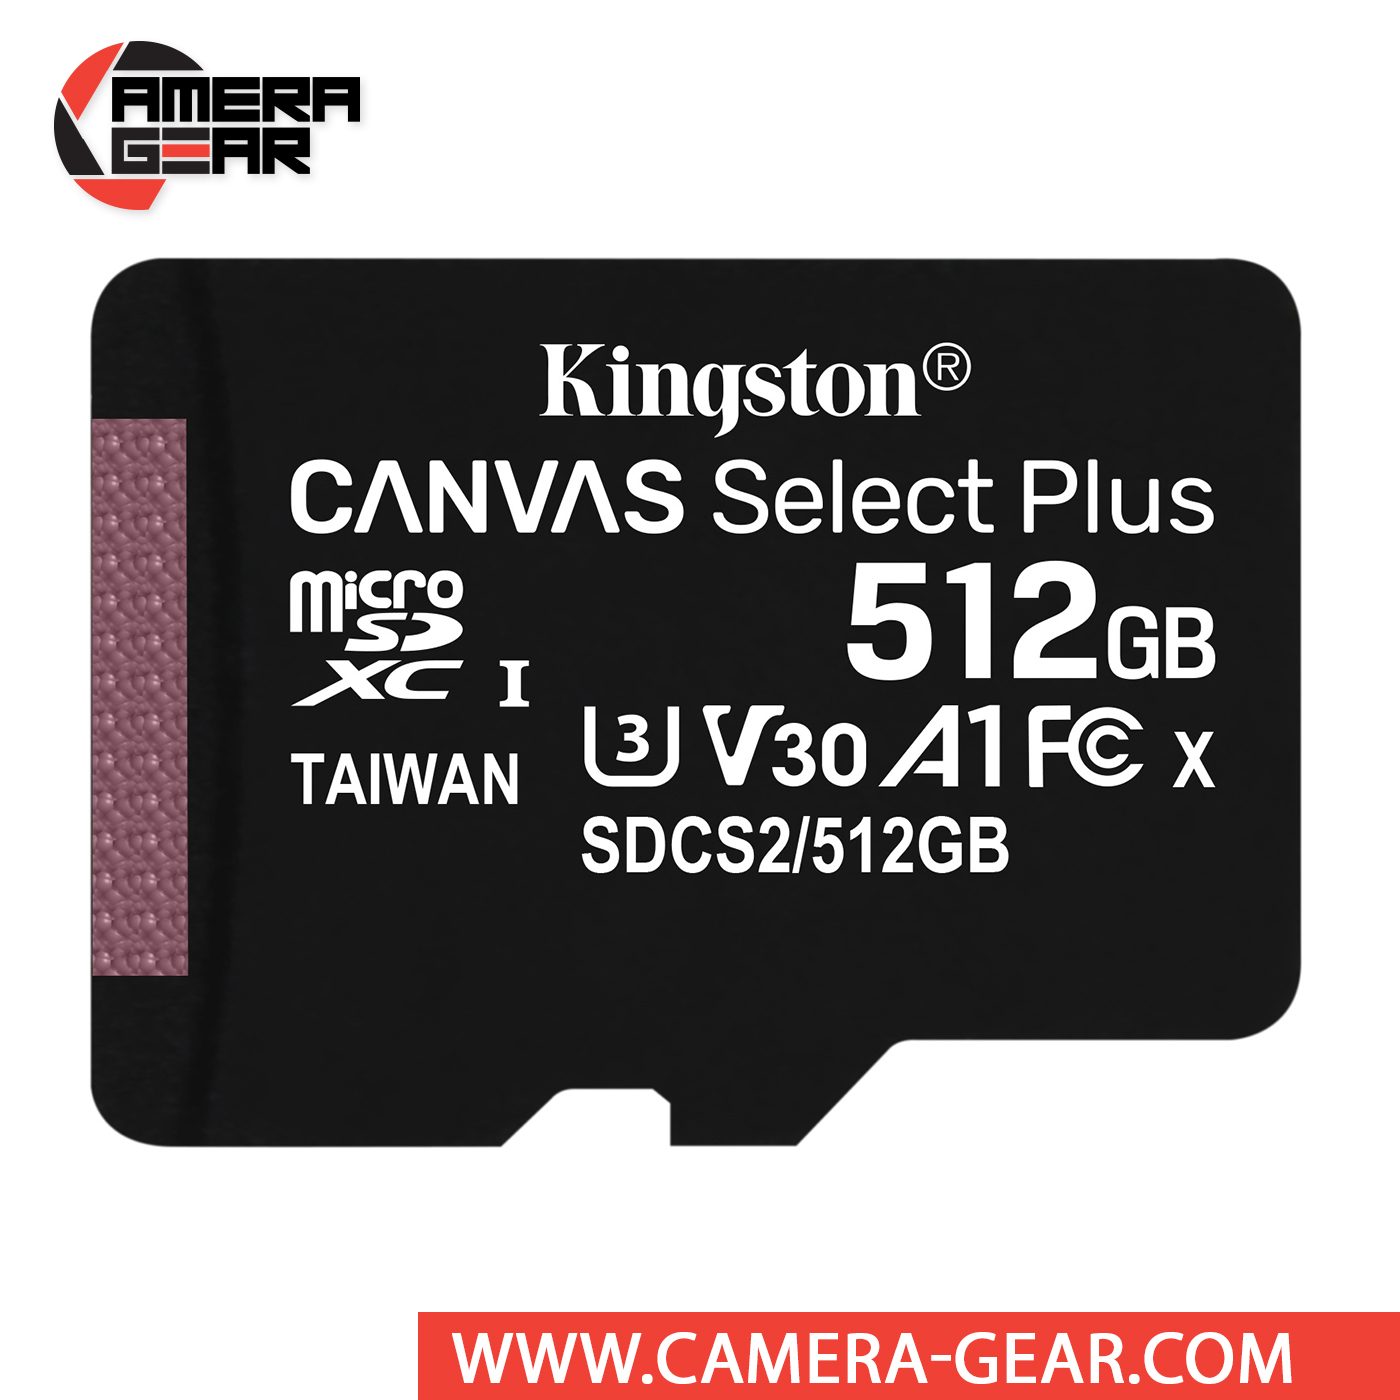 Kingston 512GB Samsung SM-T567 MicroSDXC Canvas Select Plus Card Verified by SanFlash. 100MBs Works with Kingston 